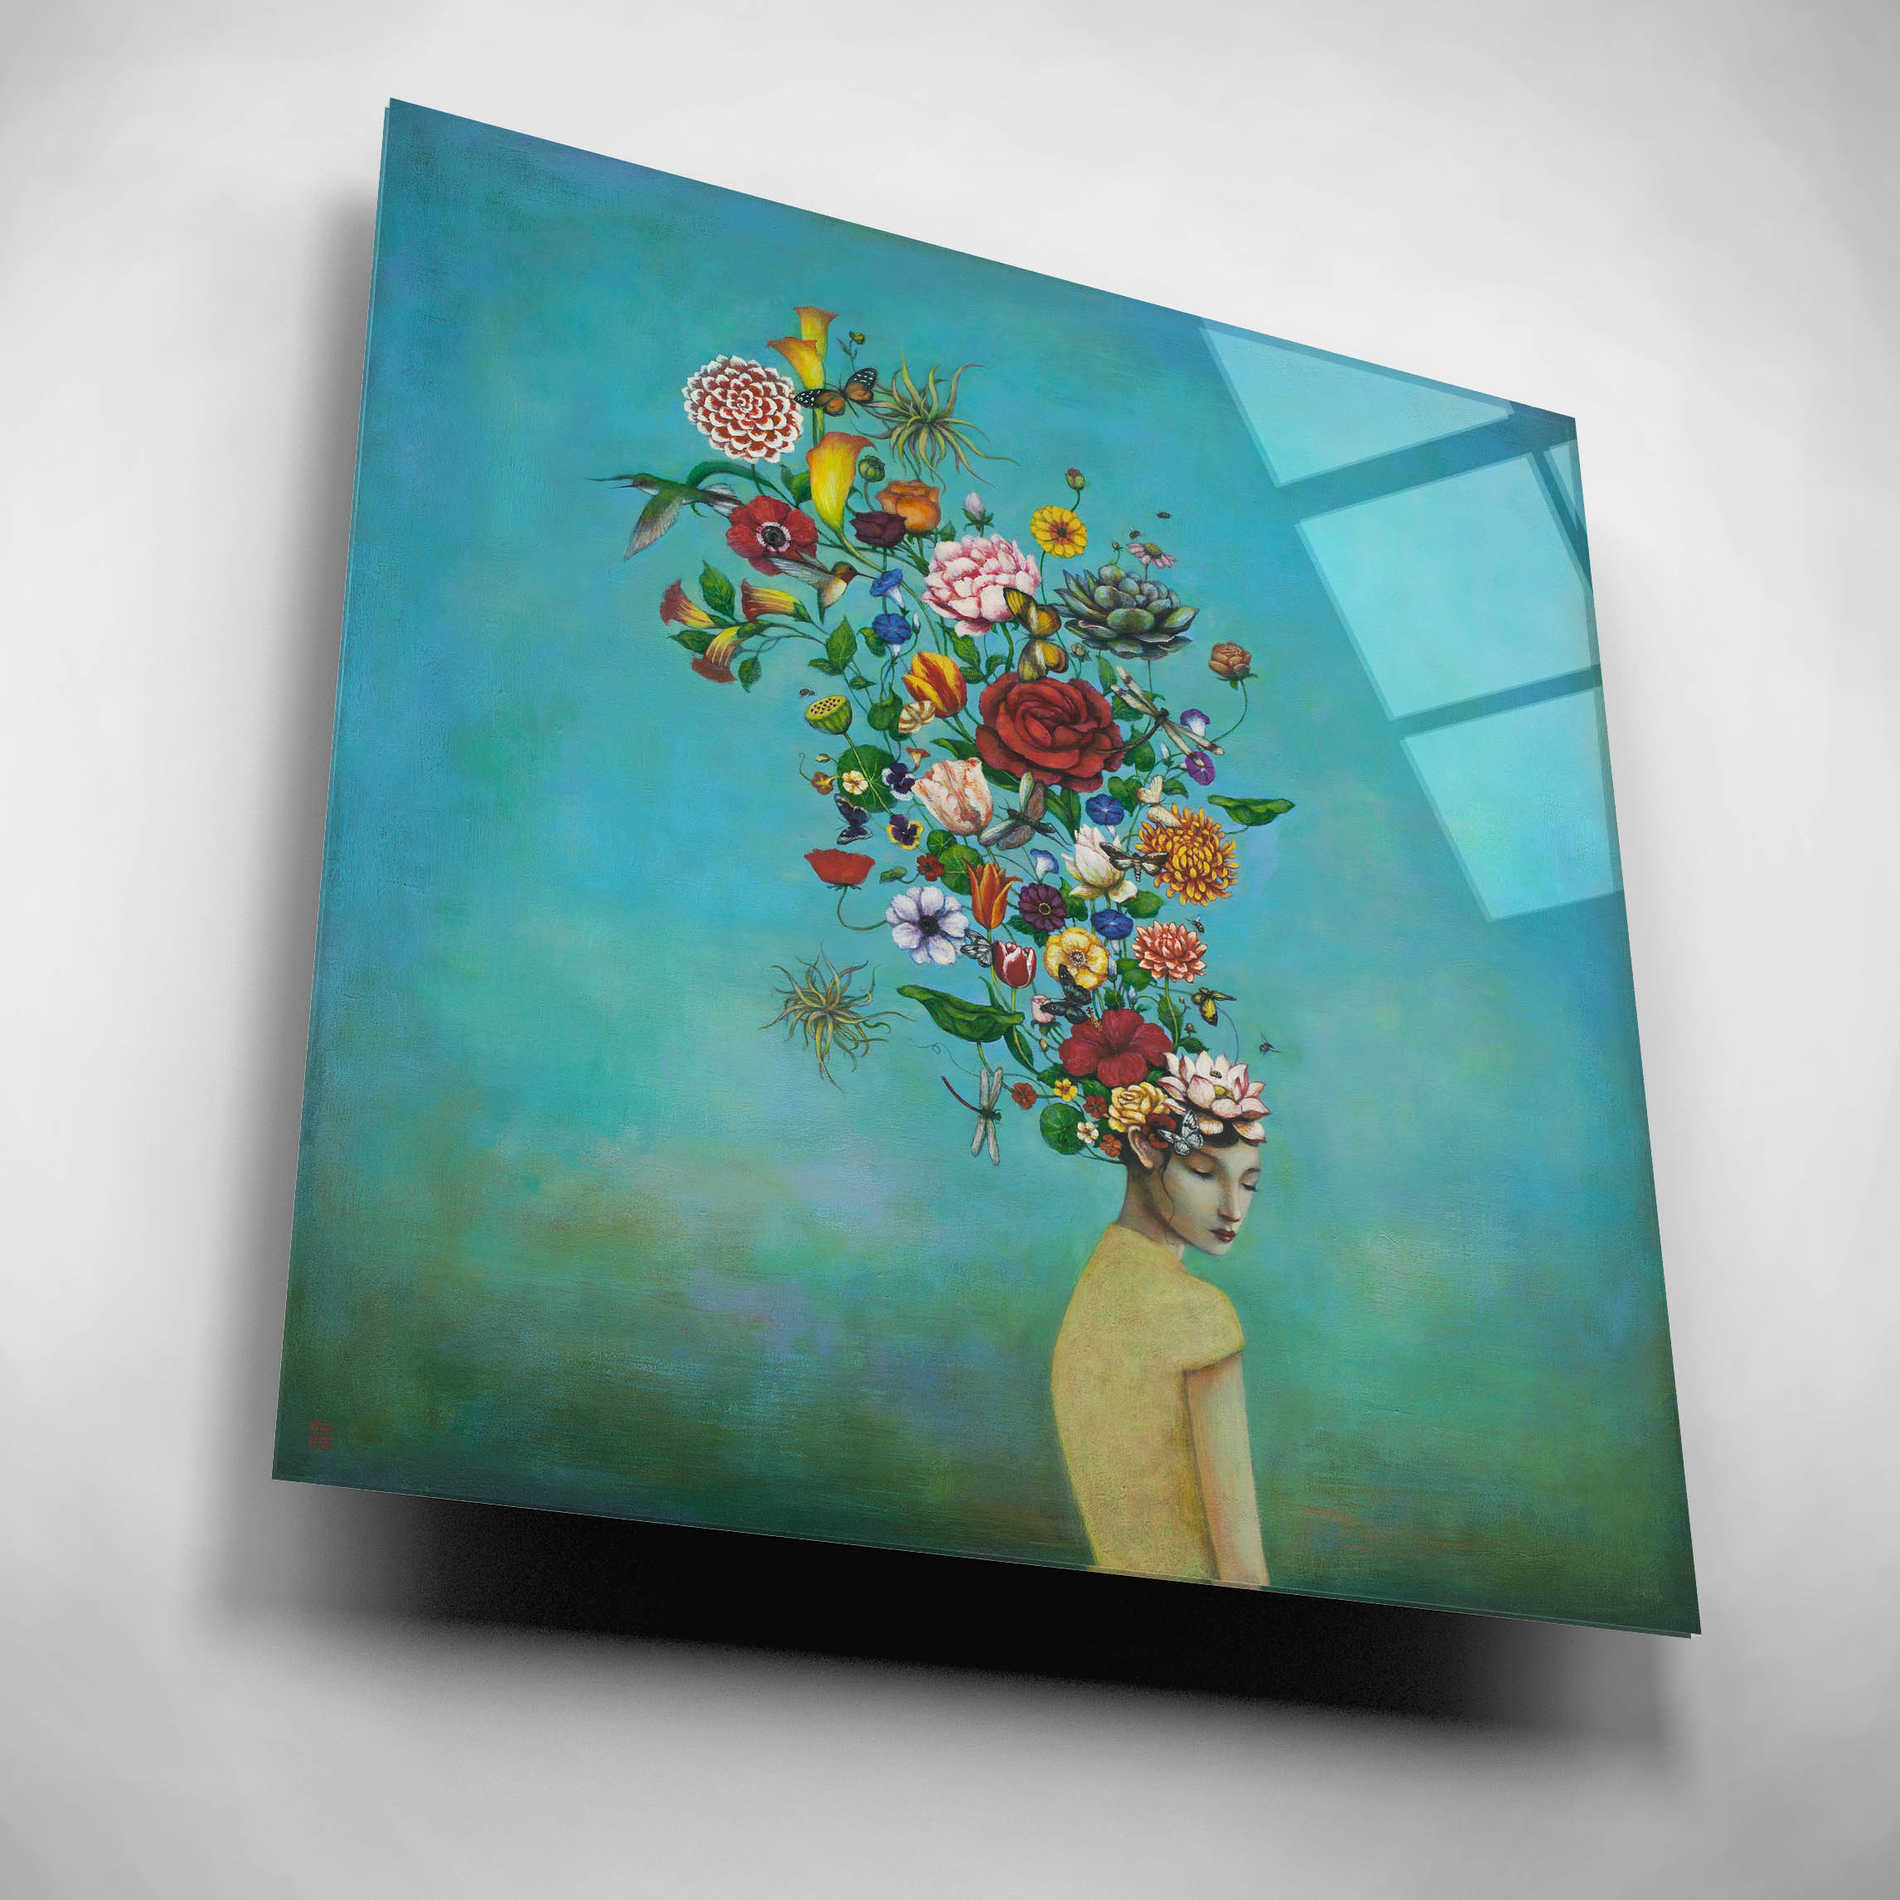 Epic Art 'A Mindful Garden' by Duy Huynh, Acrylic Glass Wall Art,12x12